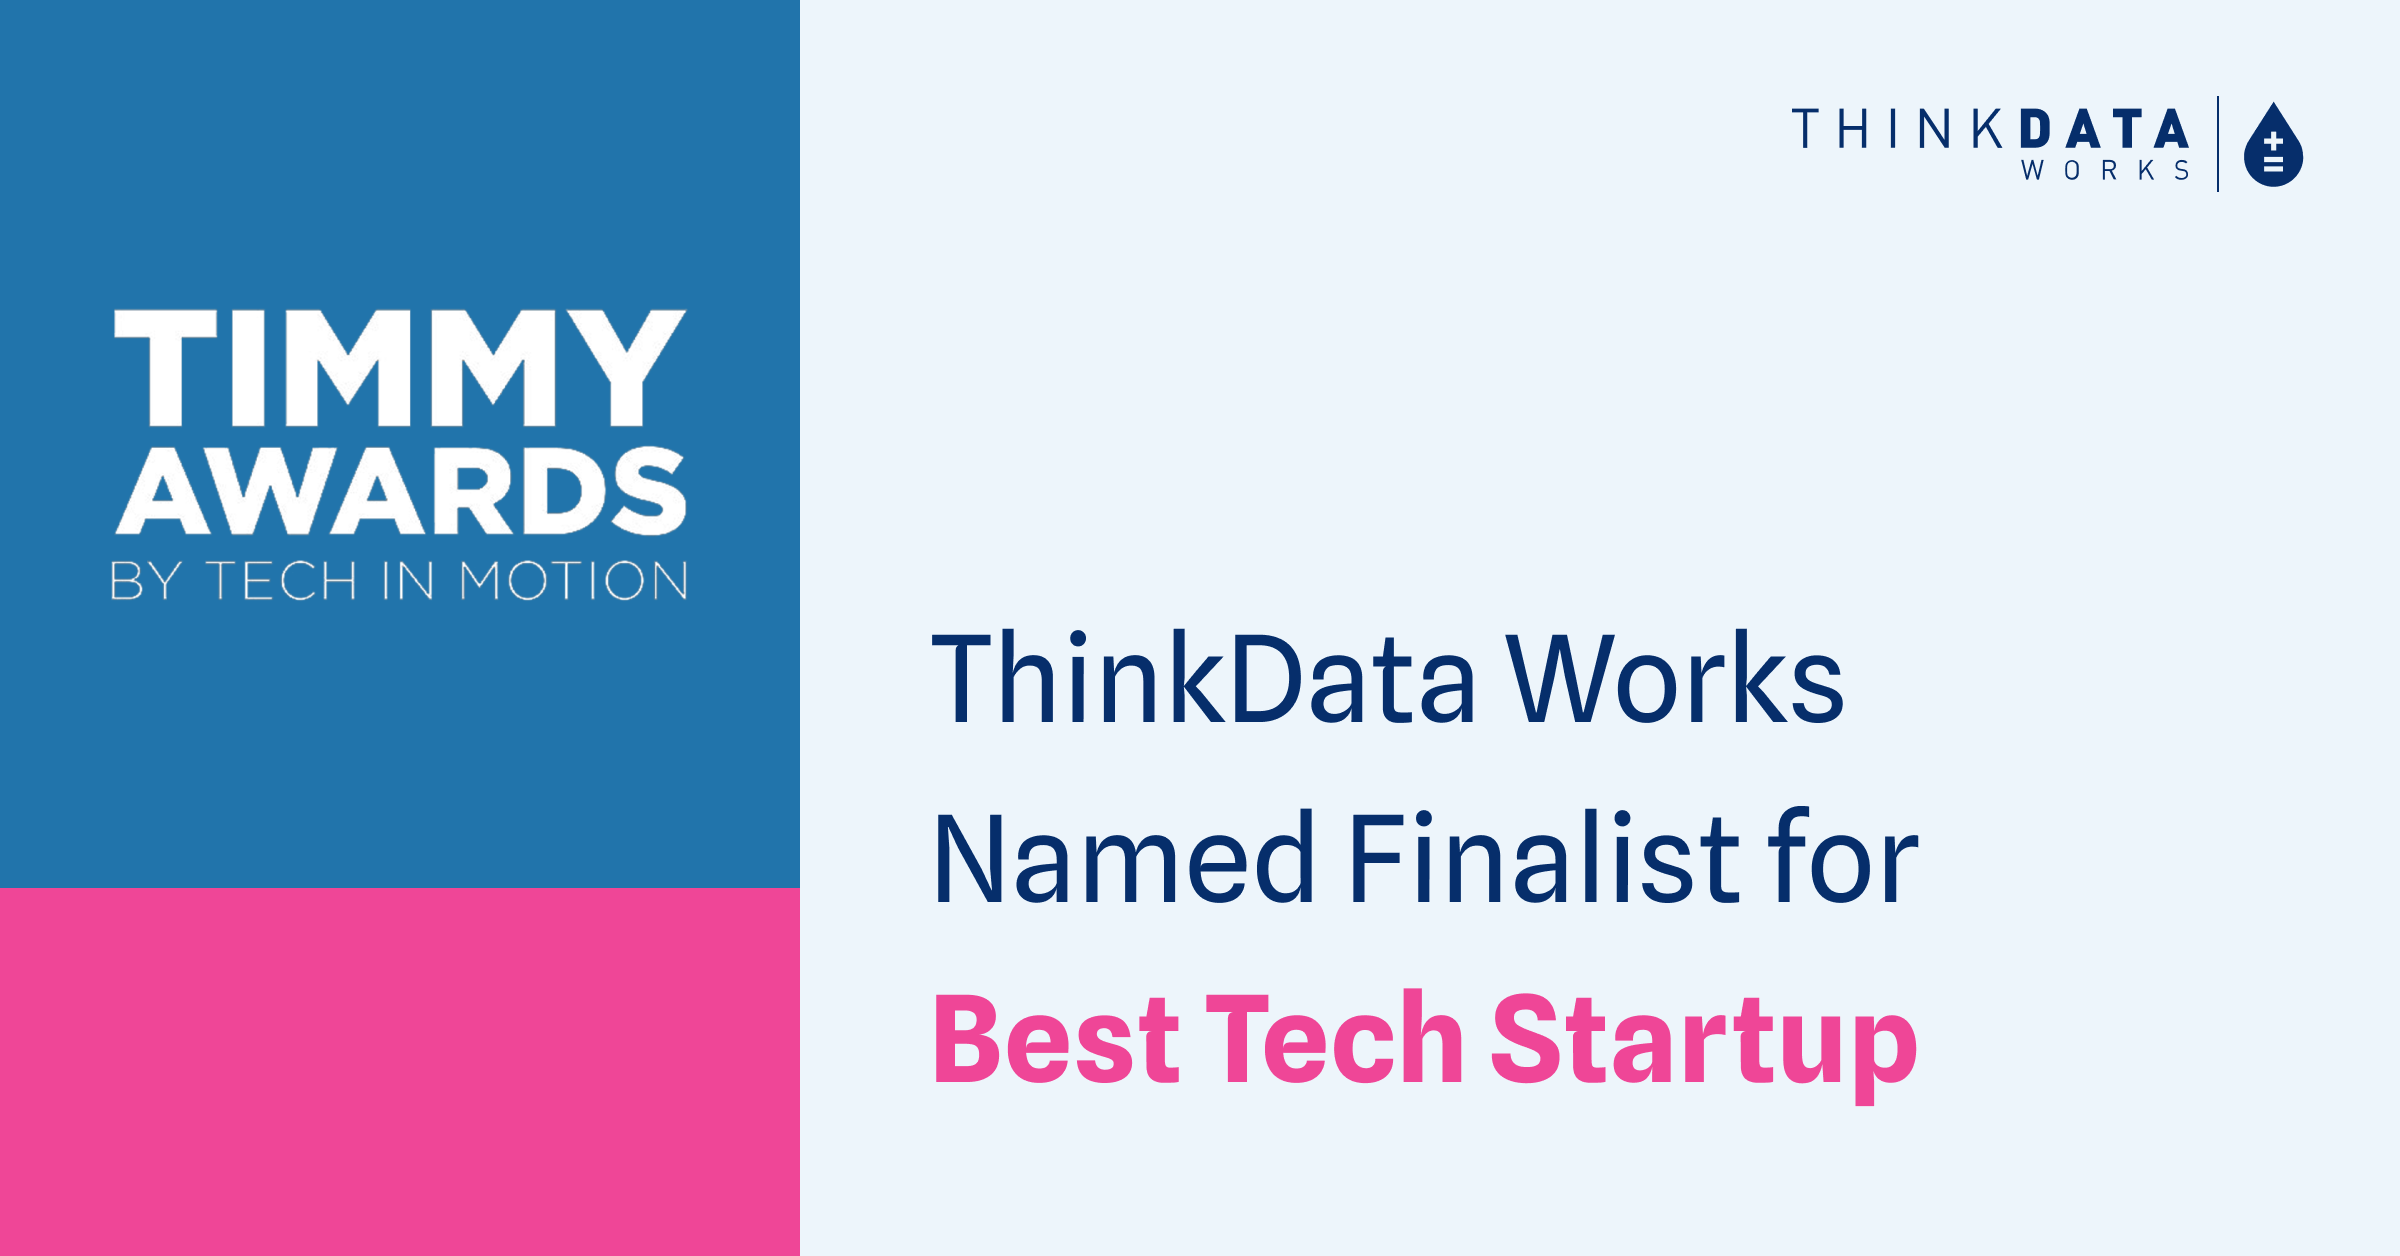 ThinkData Works named finalist in Best Tech Startup for Timmy Awards 2022